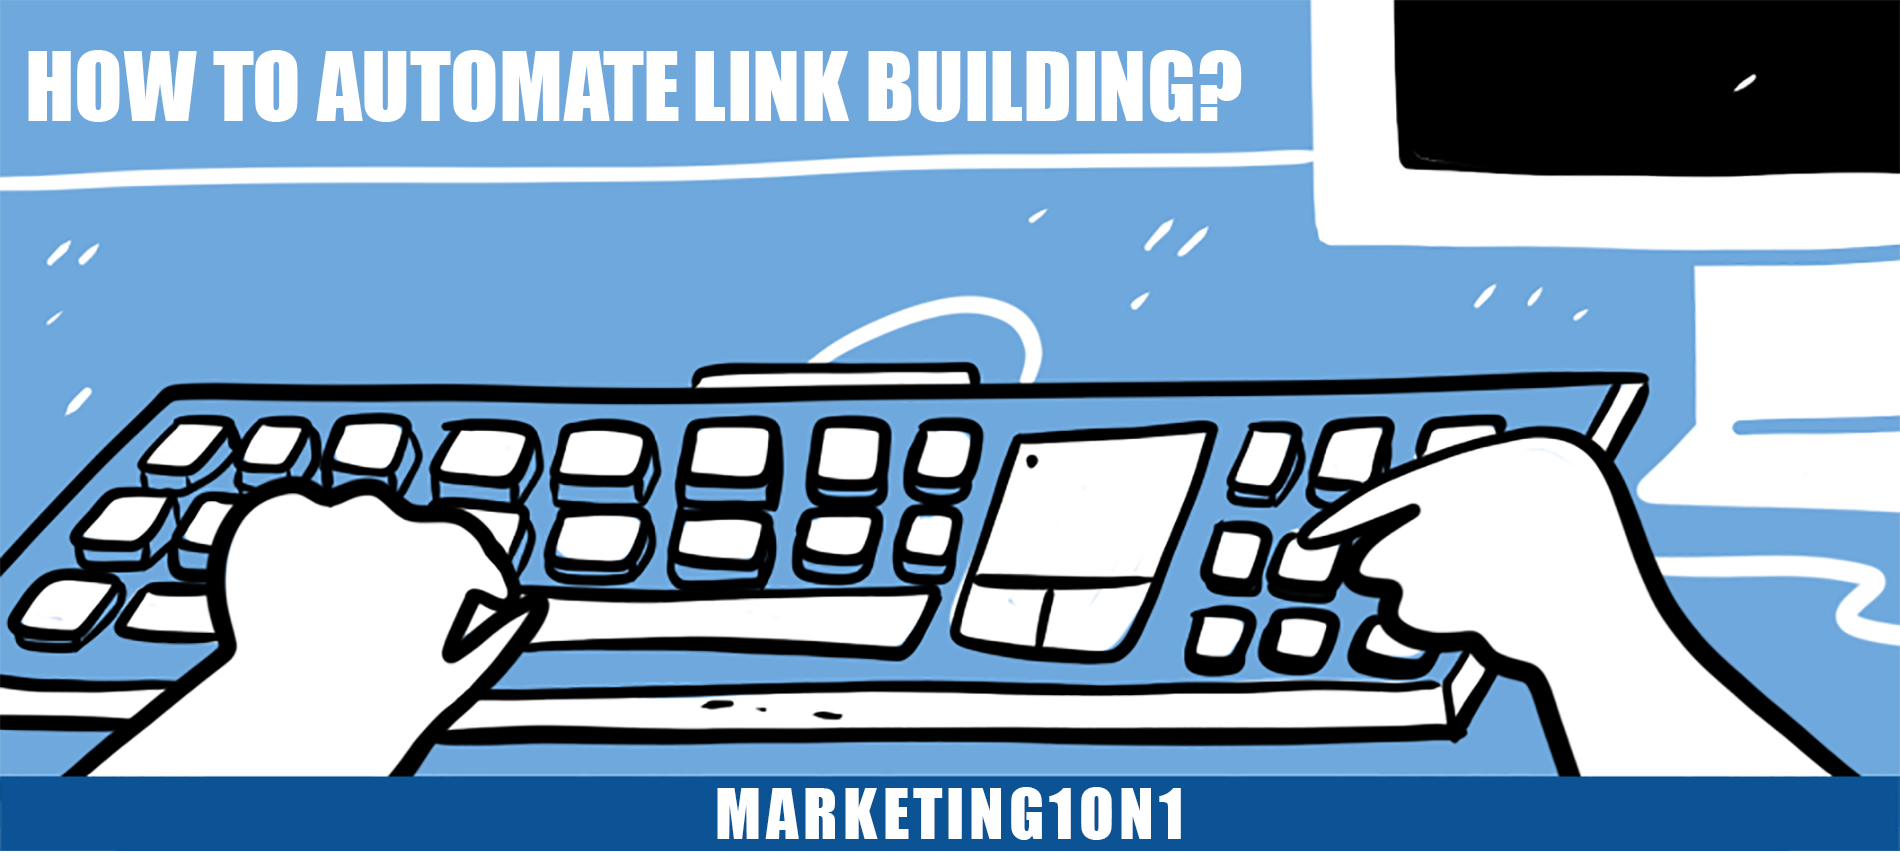 How to automate link building?